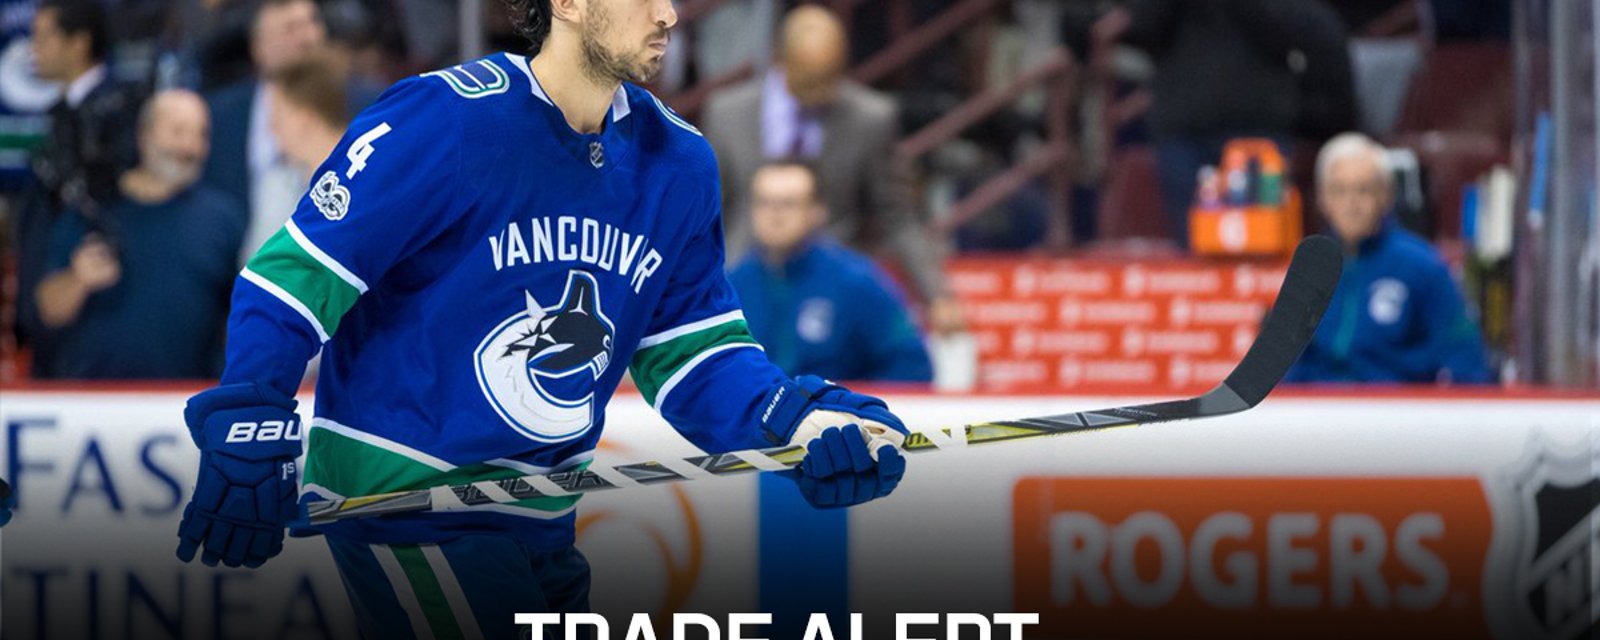 Breaking: Canucks trade Del Zotto during game!